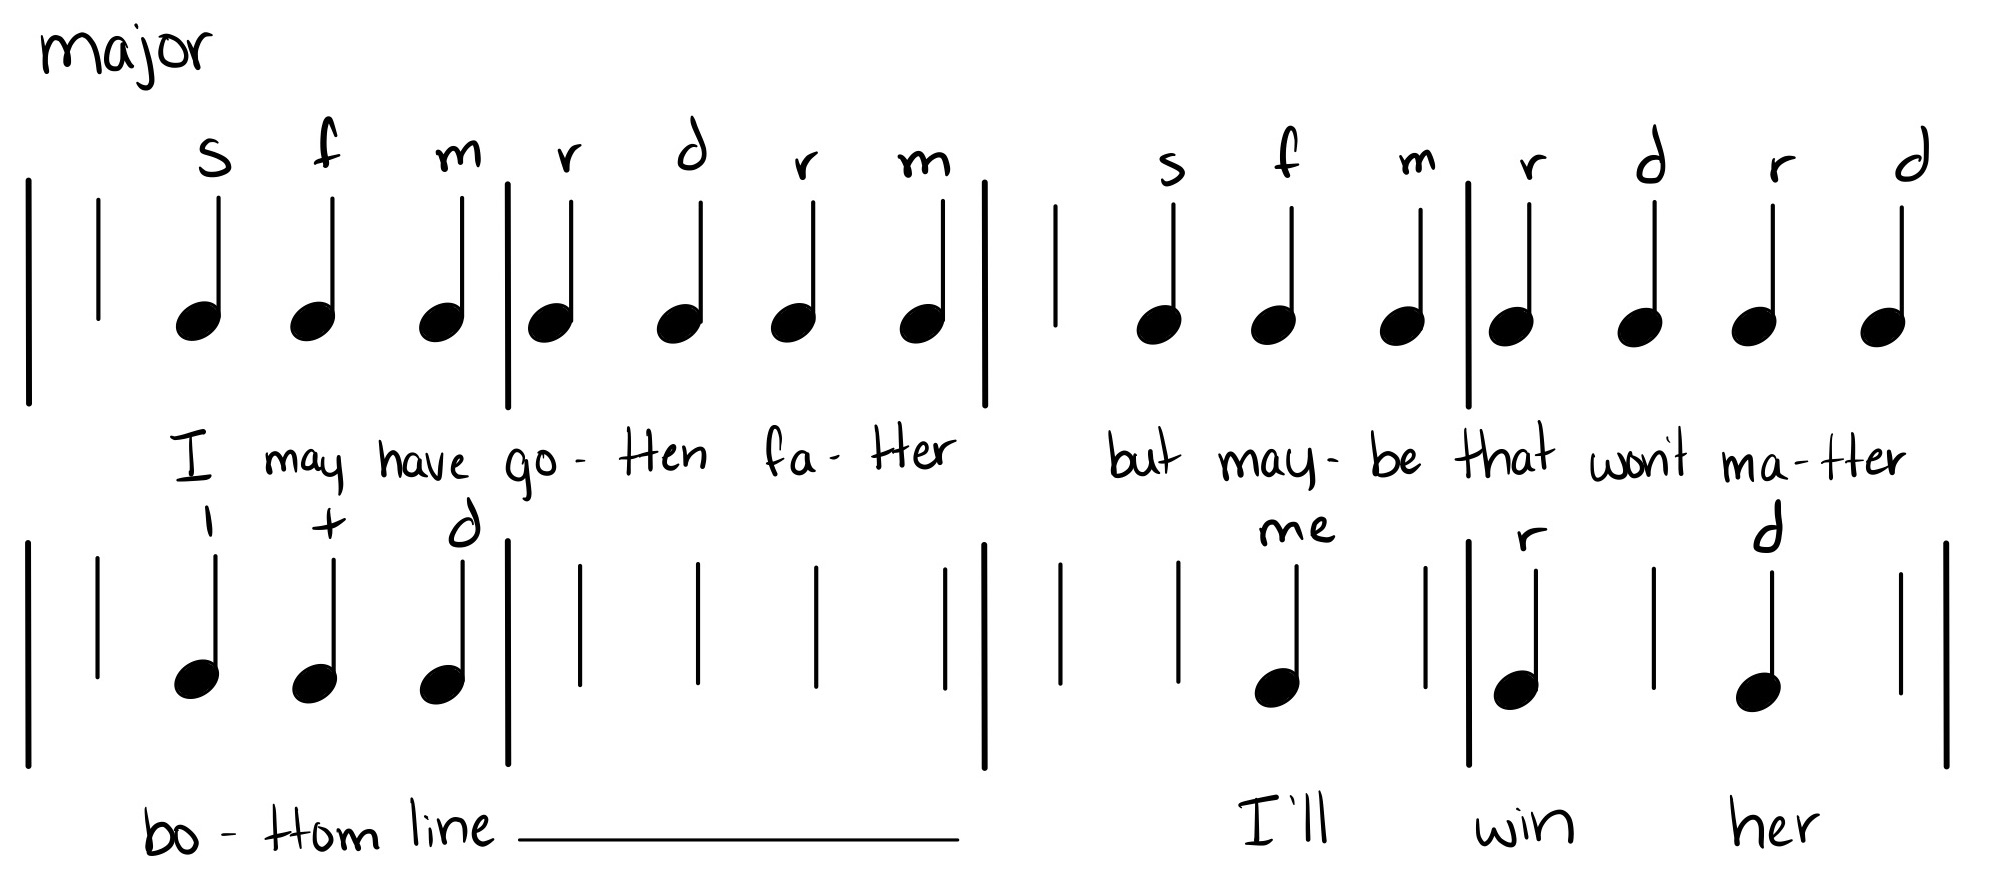 Pitch and rhythm “notehead shorthand” for 0:08–0:16 of the melody of the song “We’ll Go From There.” Vertical barlines separate the measures. Each half-beat is represented by the stem of a quarter note. Each stem where a new note sounds is given a notehead. The first letters of the solfège syllables representing the notes are written above the stems with noteheads. The lowered scale-degree 3 at the word “I’ll” is represented by the solfège syllable “me” written out in full. The lyrics of the melody are written below the noteheads.